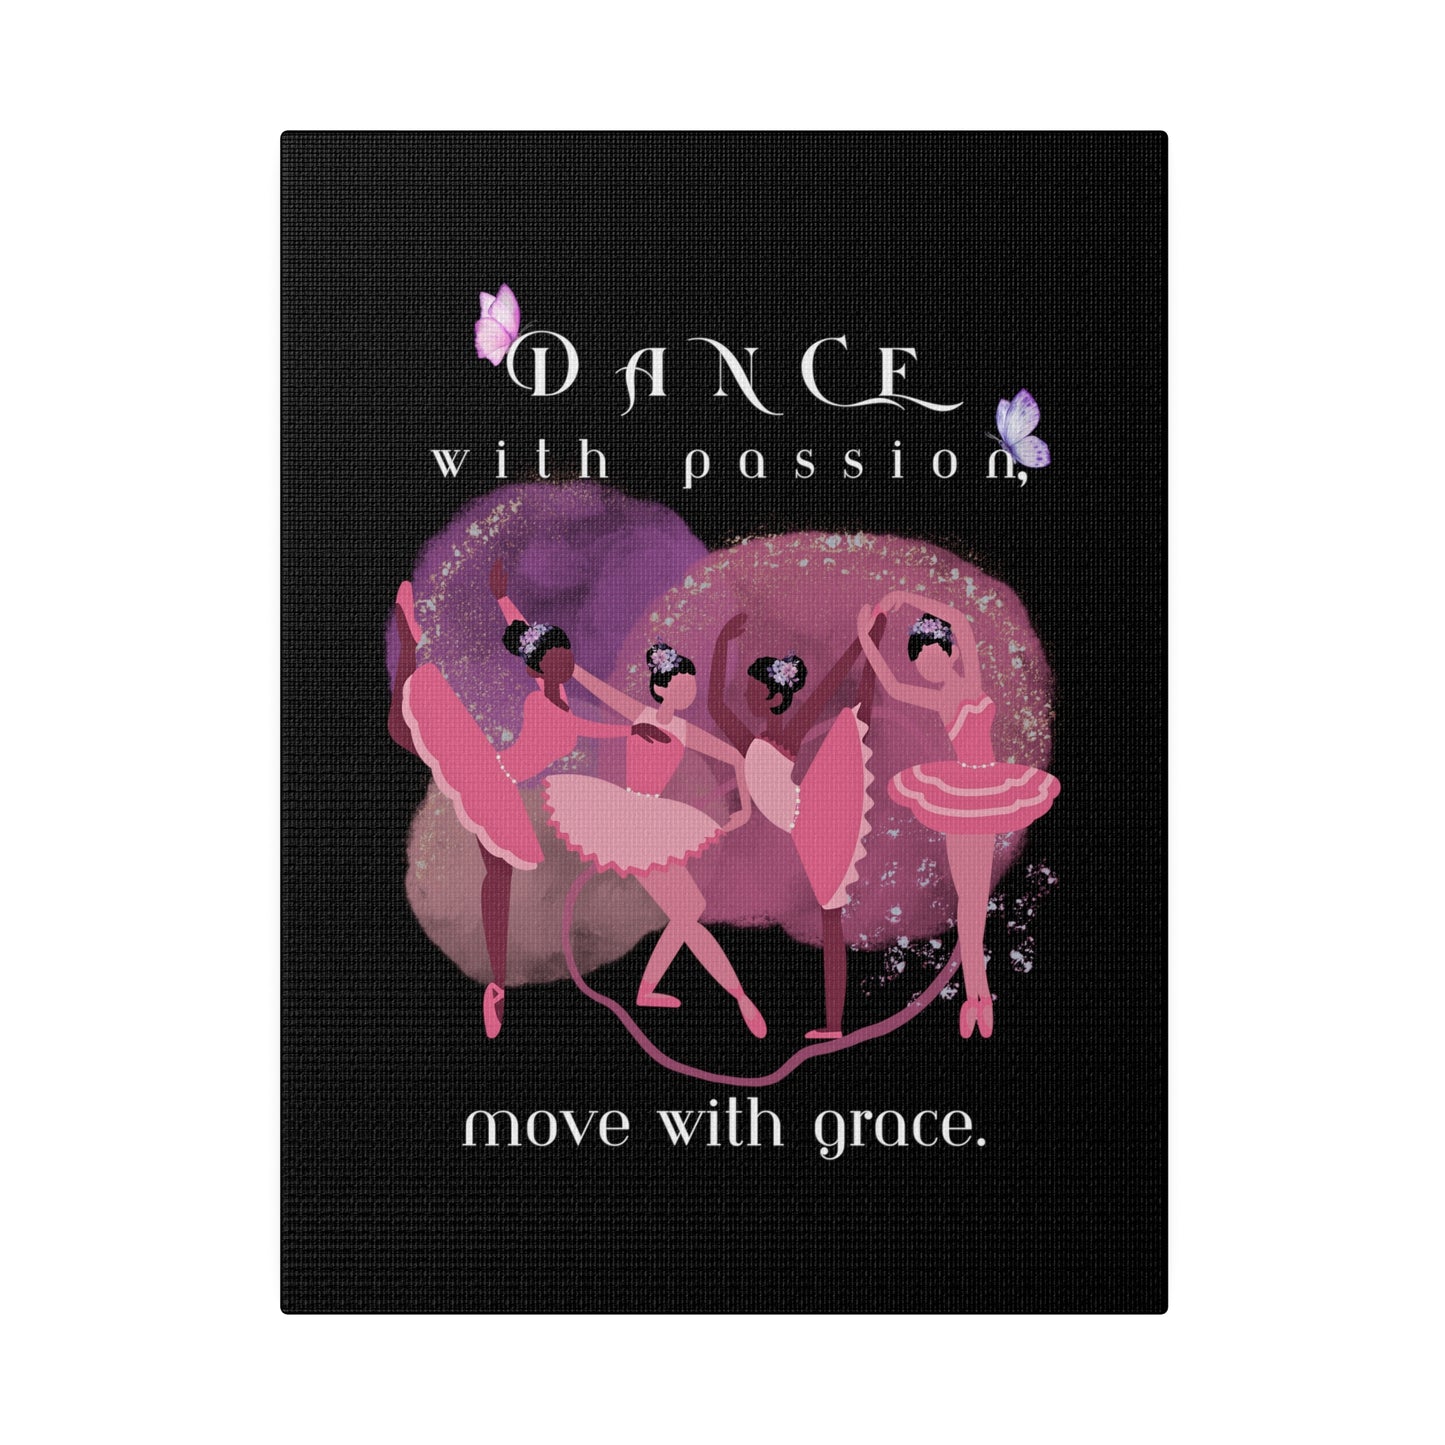 Canvas, Stretched, 0.75" - Dance with Passion (black background)